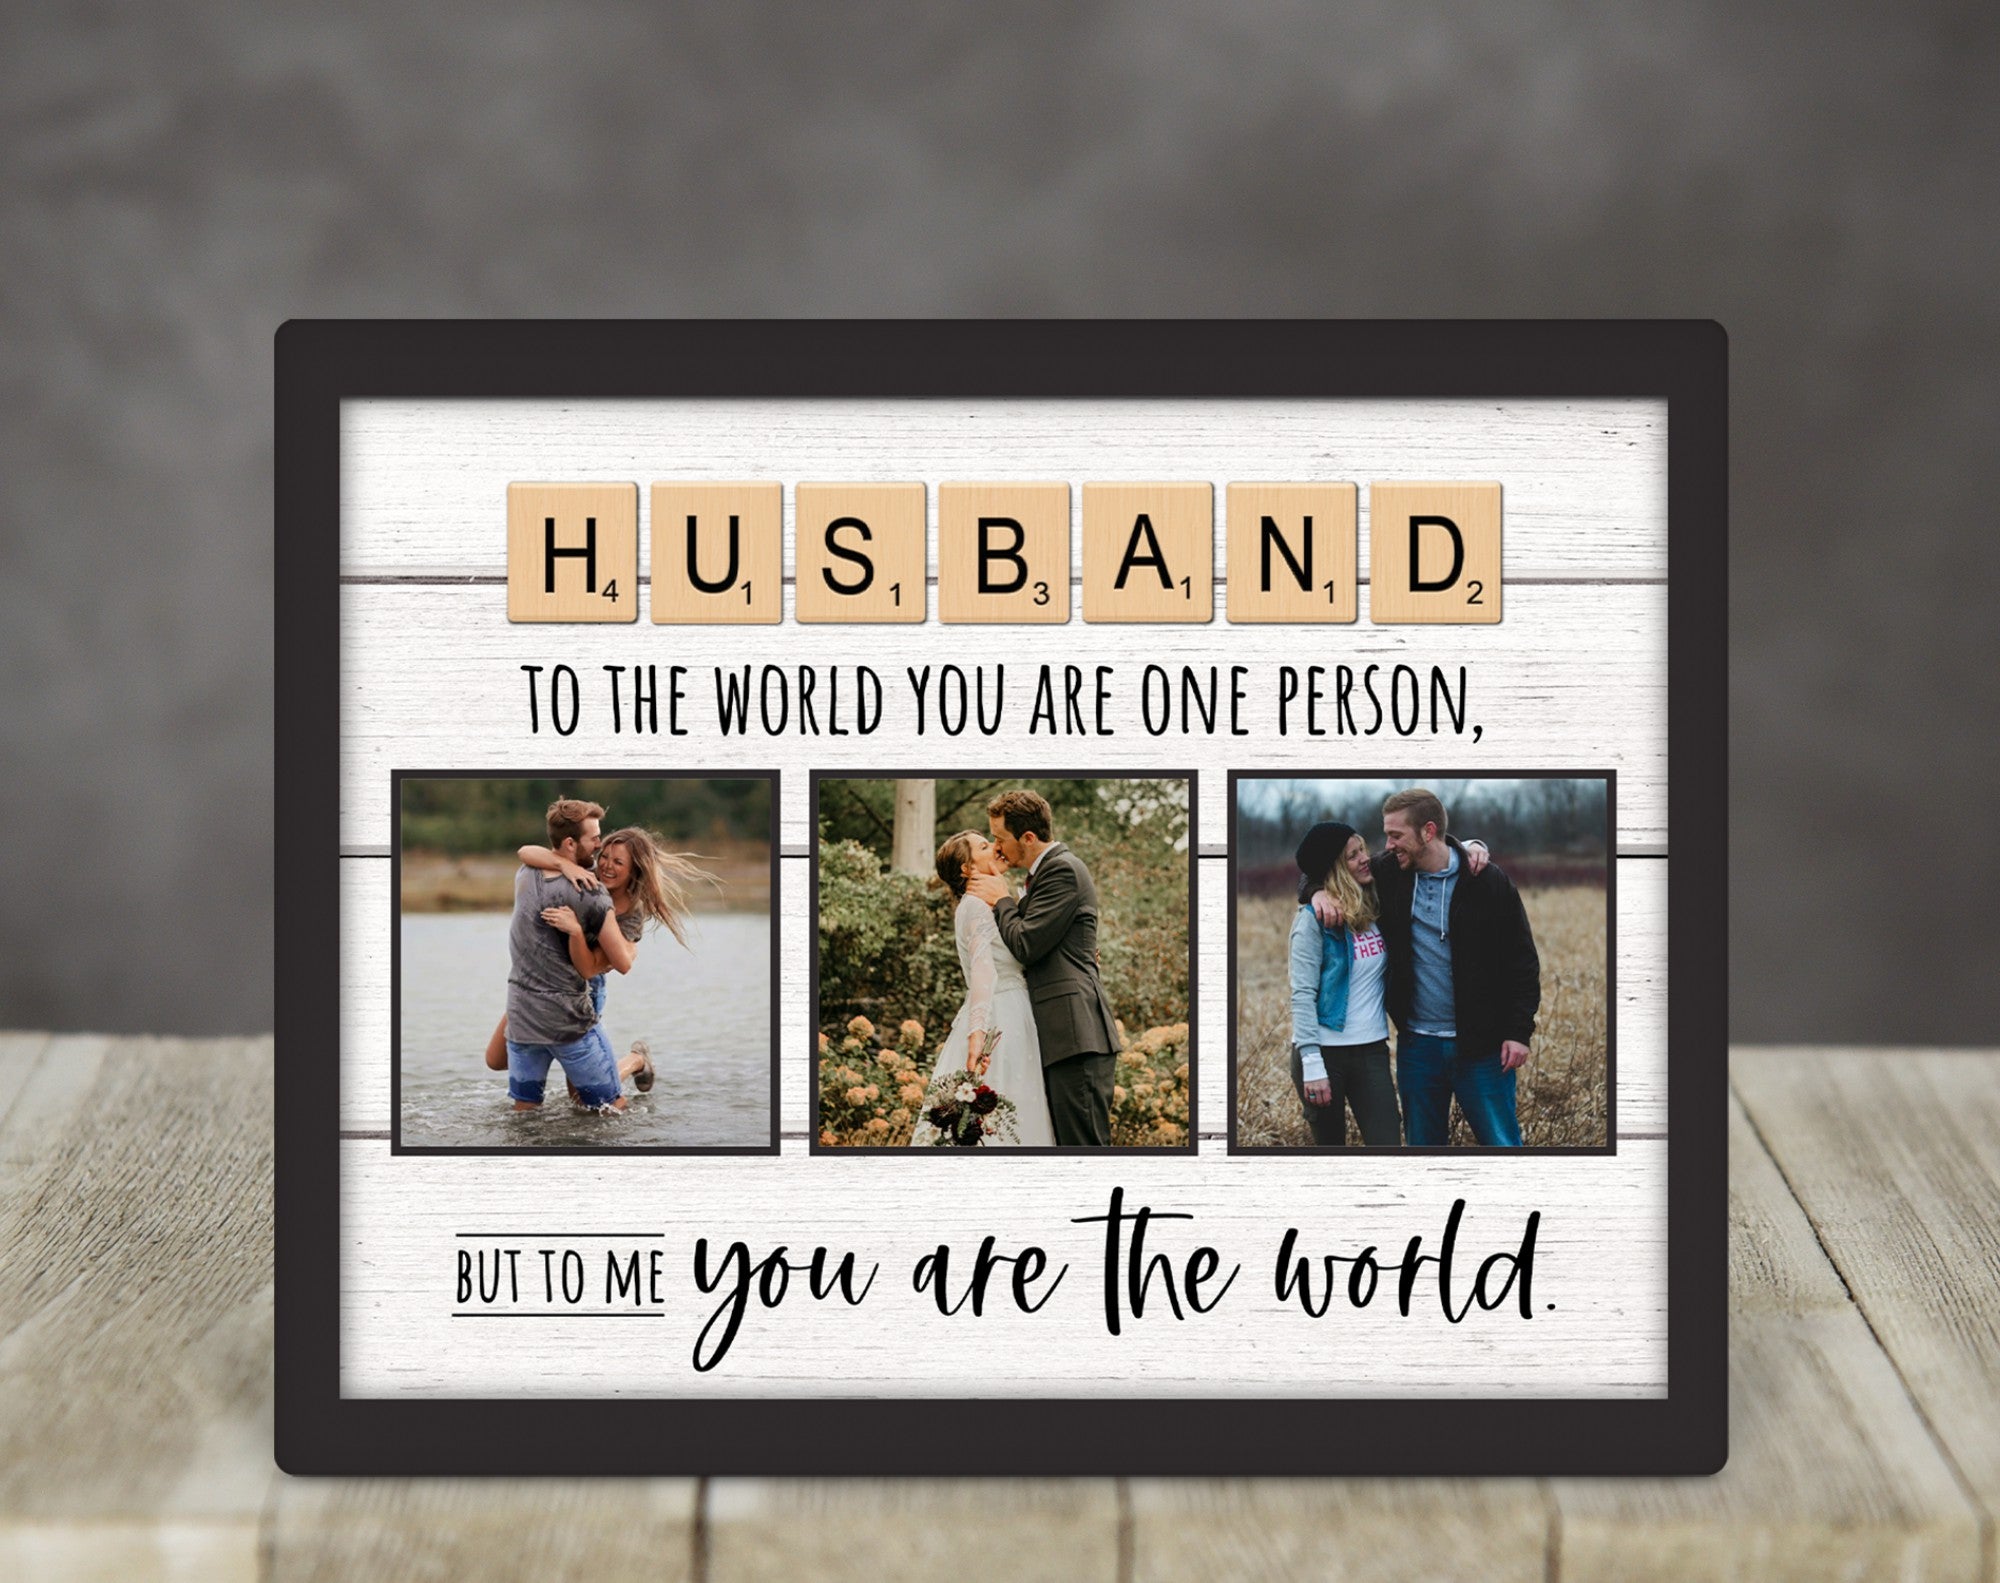 Surprise Gifts for Husband | Romantic Gifts for Husband - OyeGifts